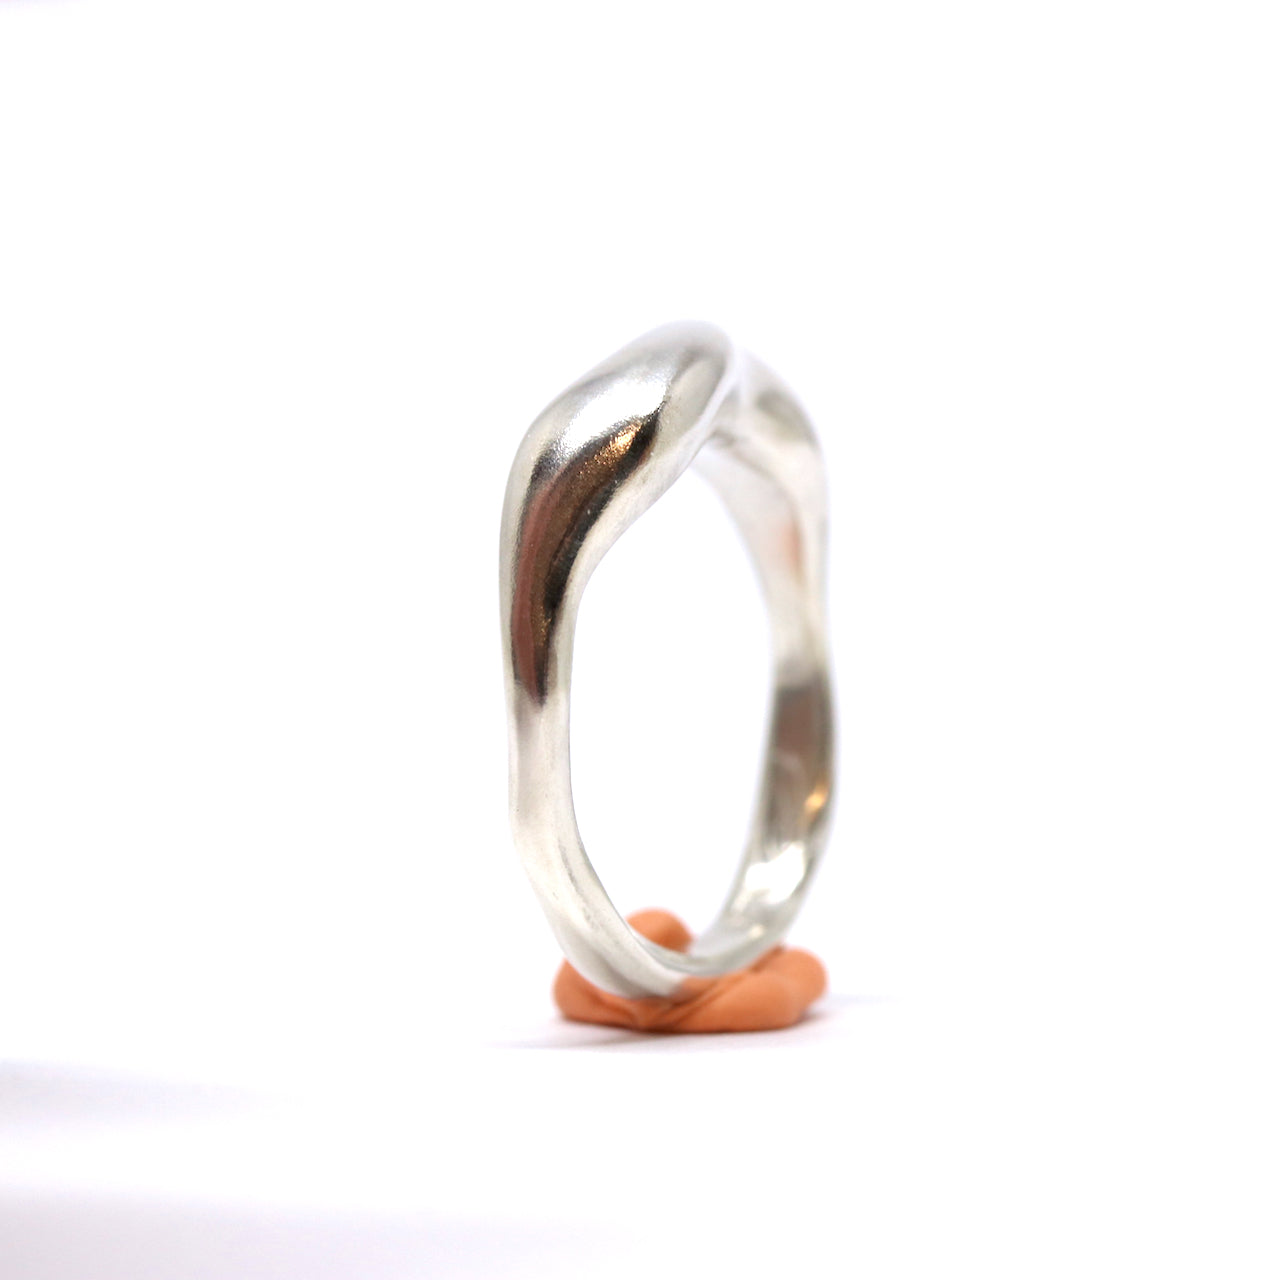 A wavy, mountain sterling silver ring. This ring was hand made in Wānaka, New Zealand by designer and jeweller Briar Hardy-Hesson.